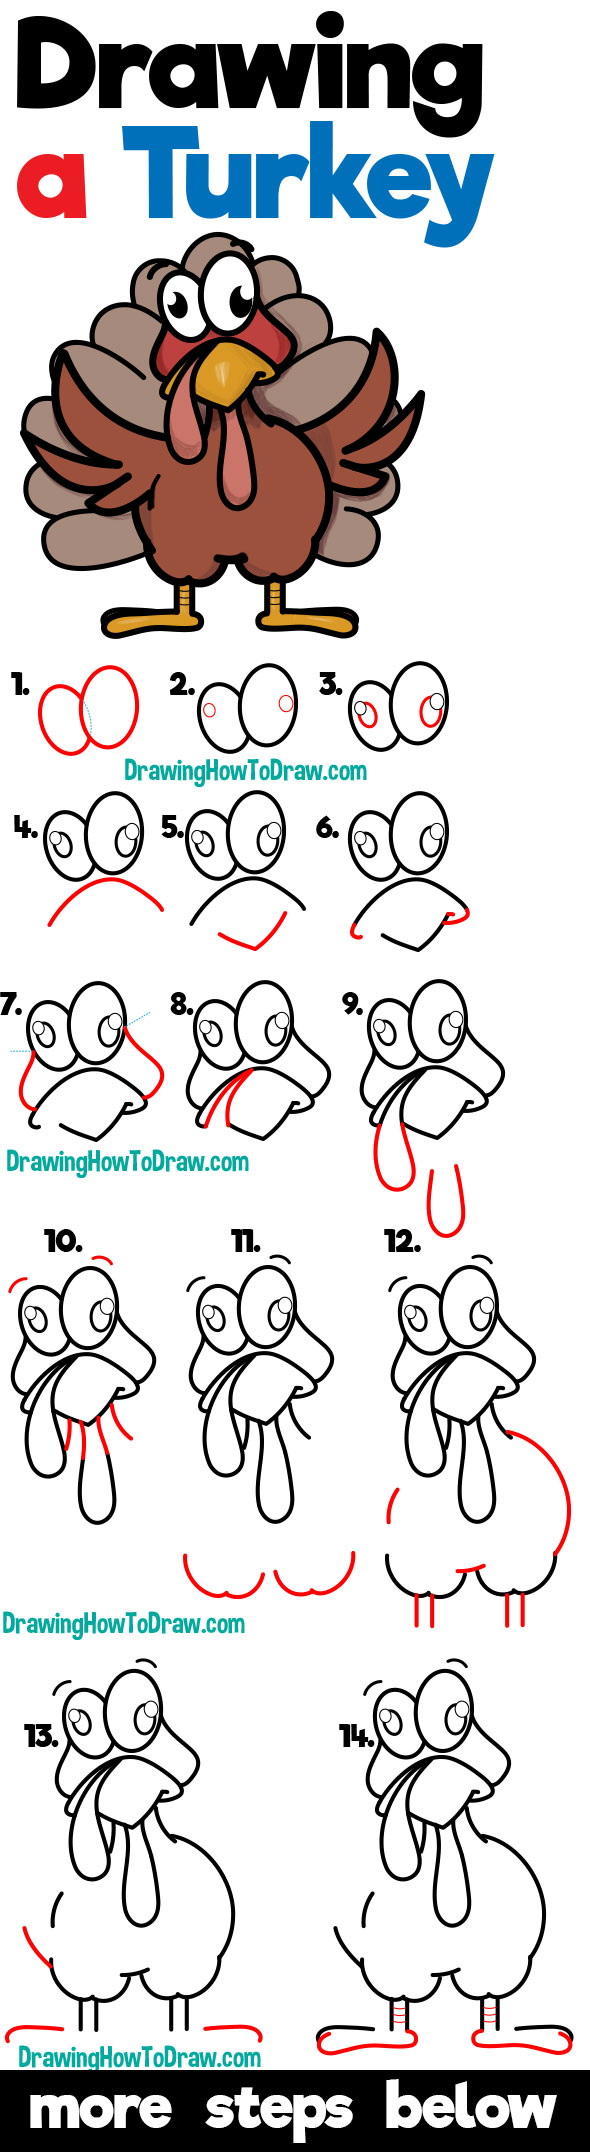 How to Draw a Cartoon Turkey for Thanksgiving Easy Step by